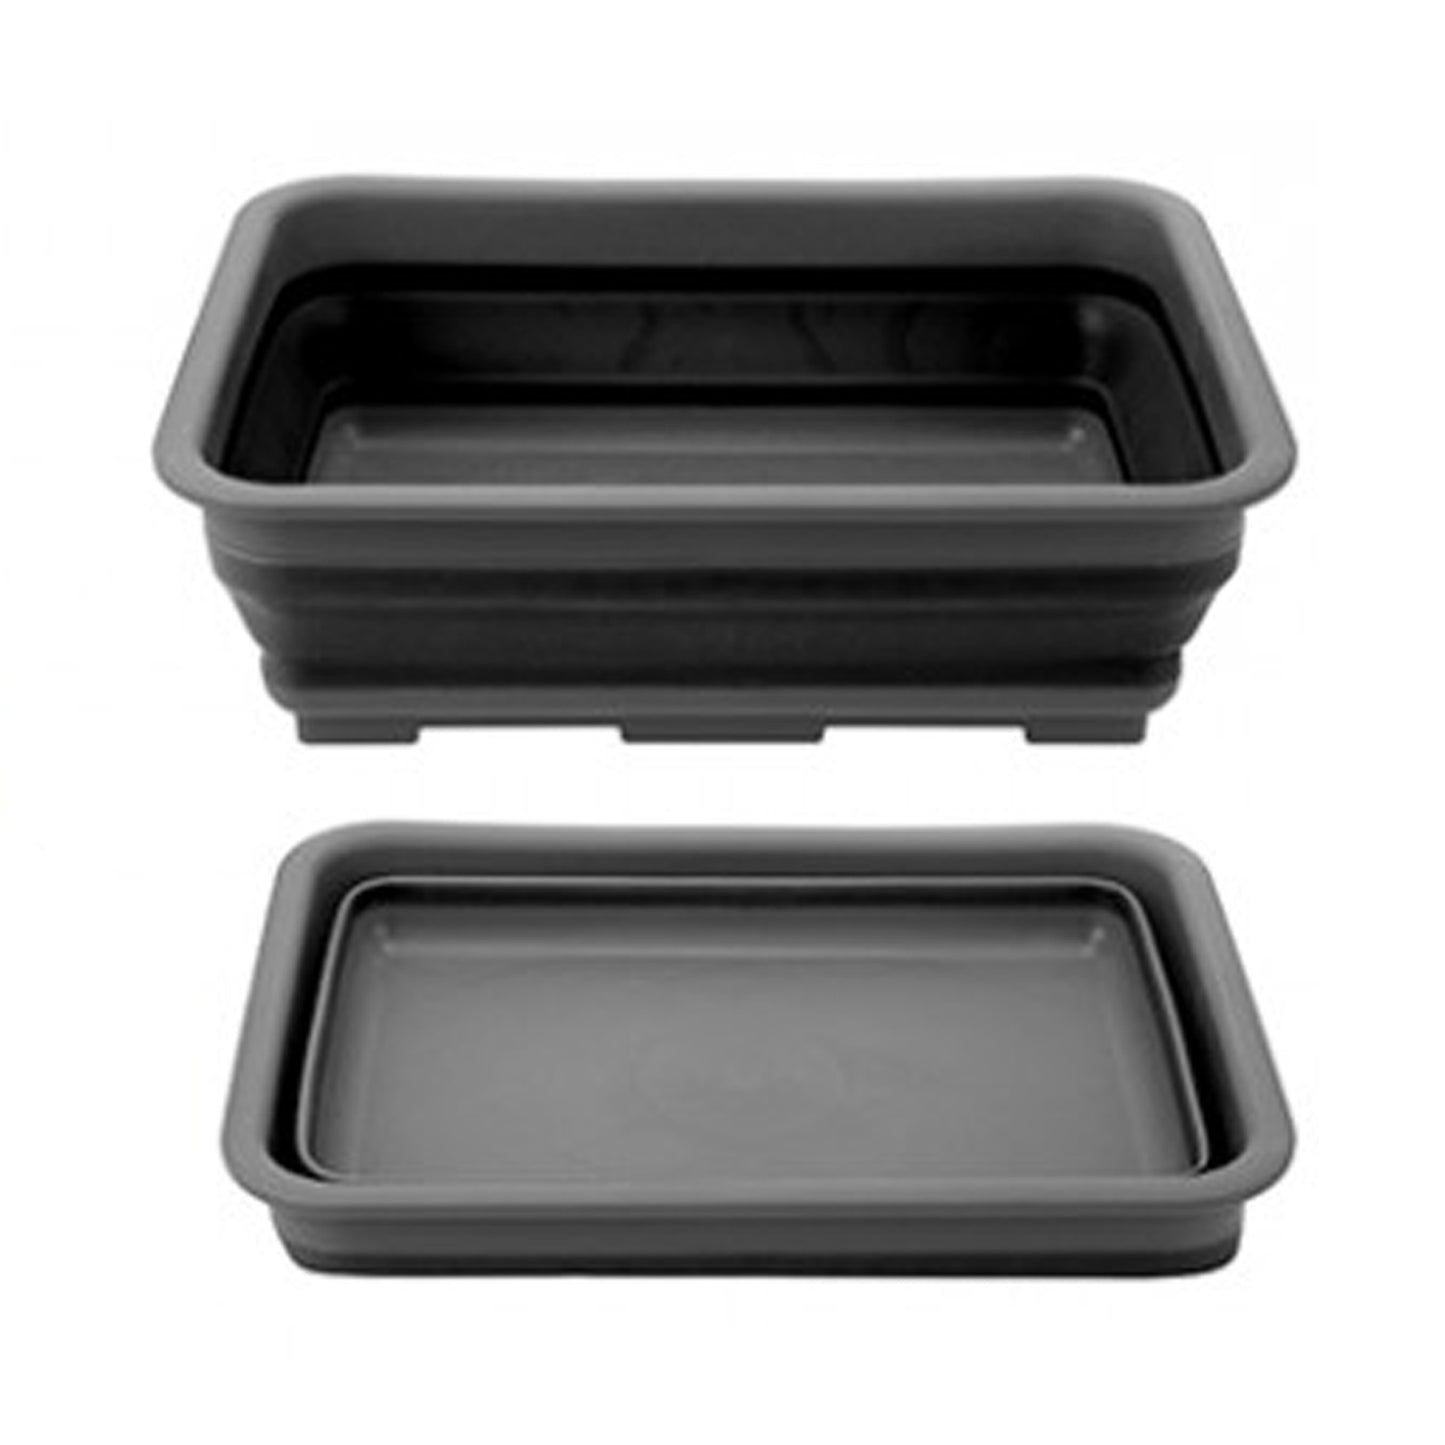 Collapsible Wash Bowl Black and Grey